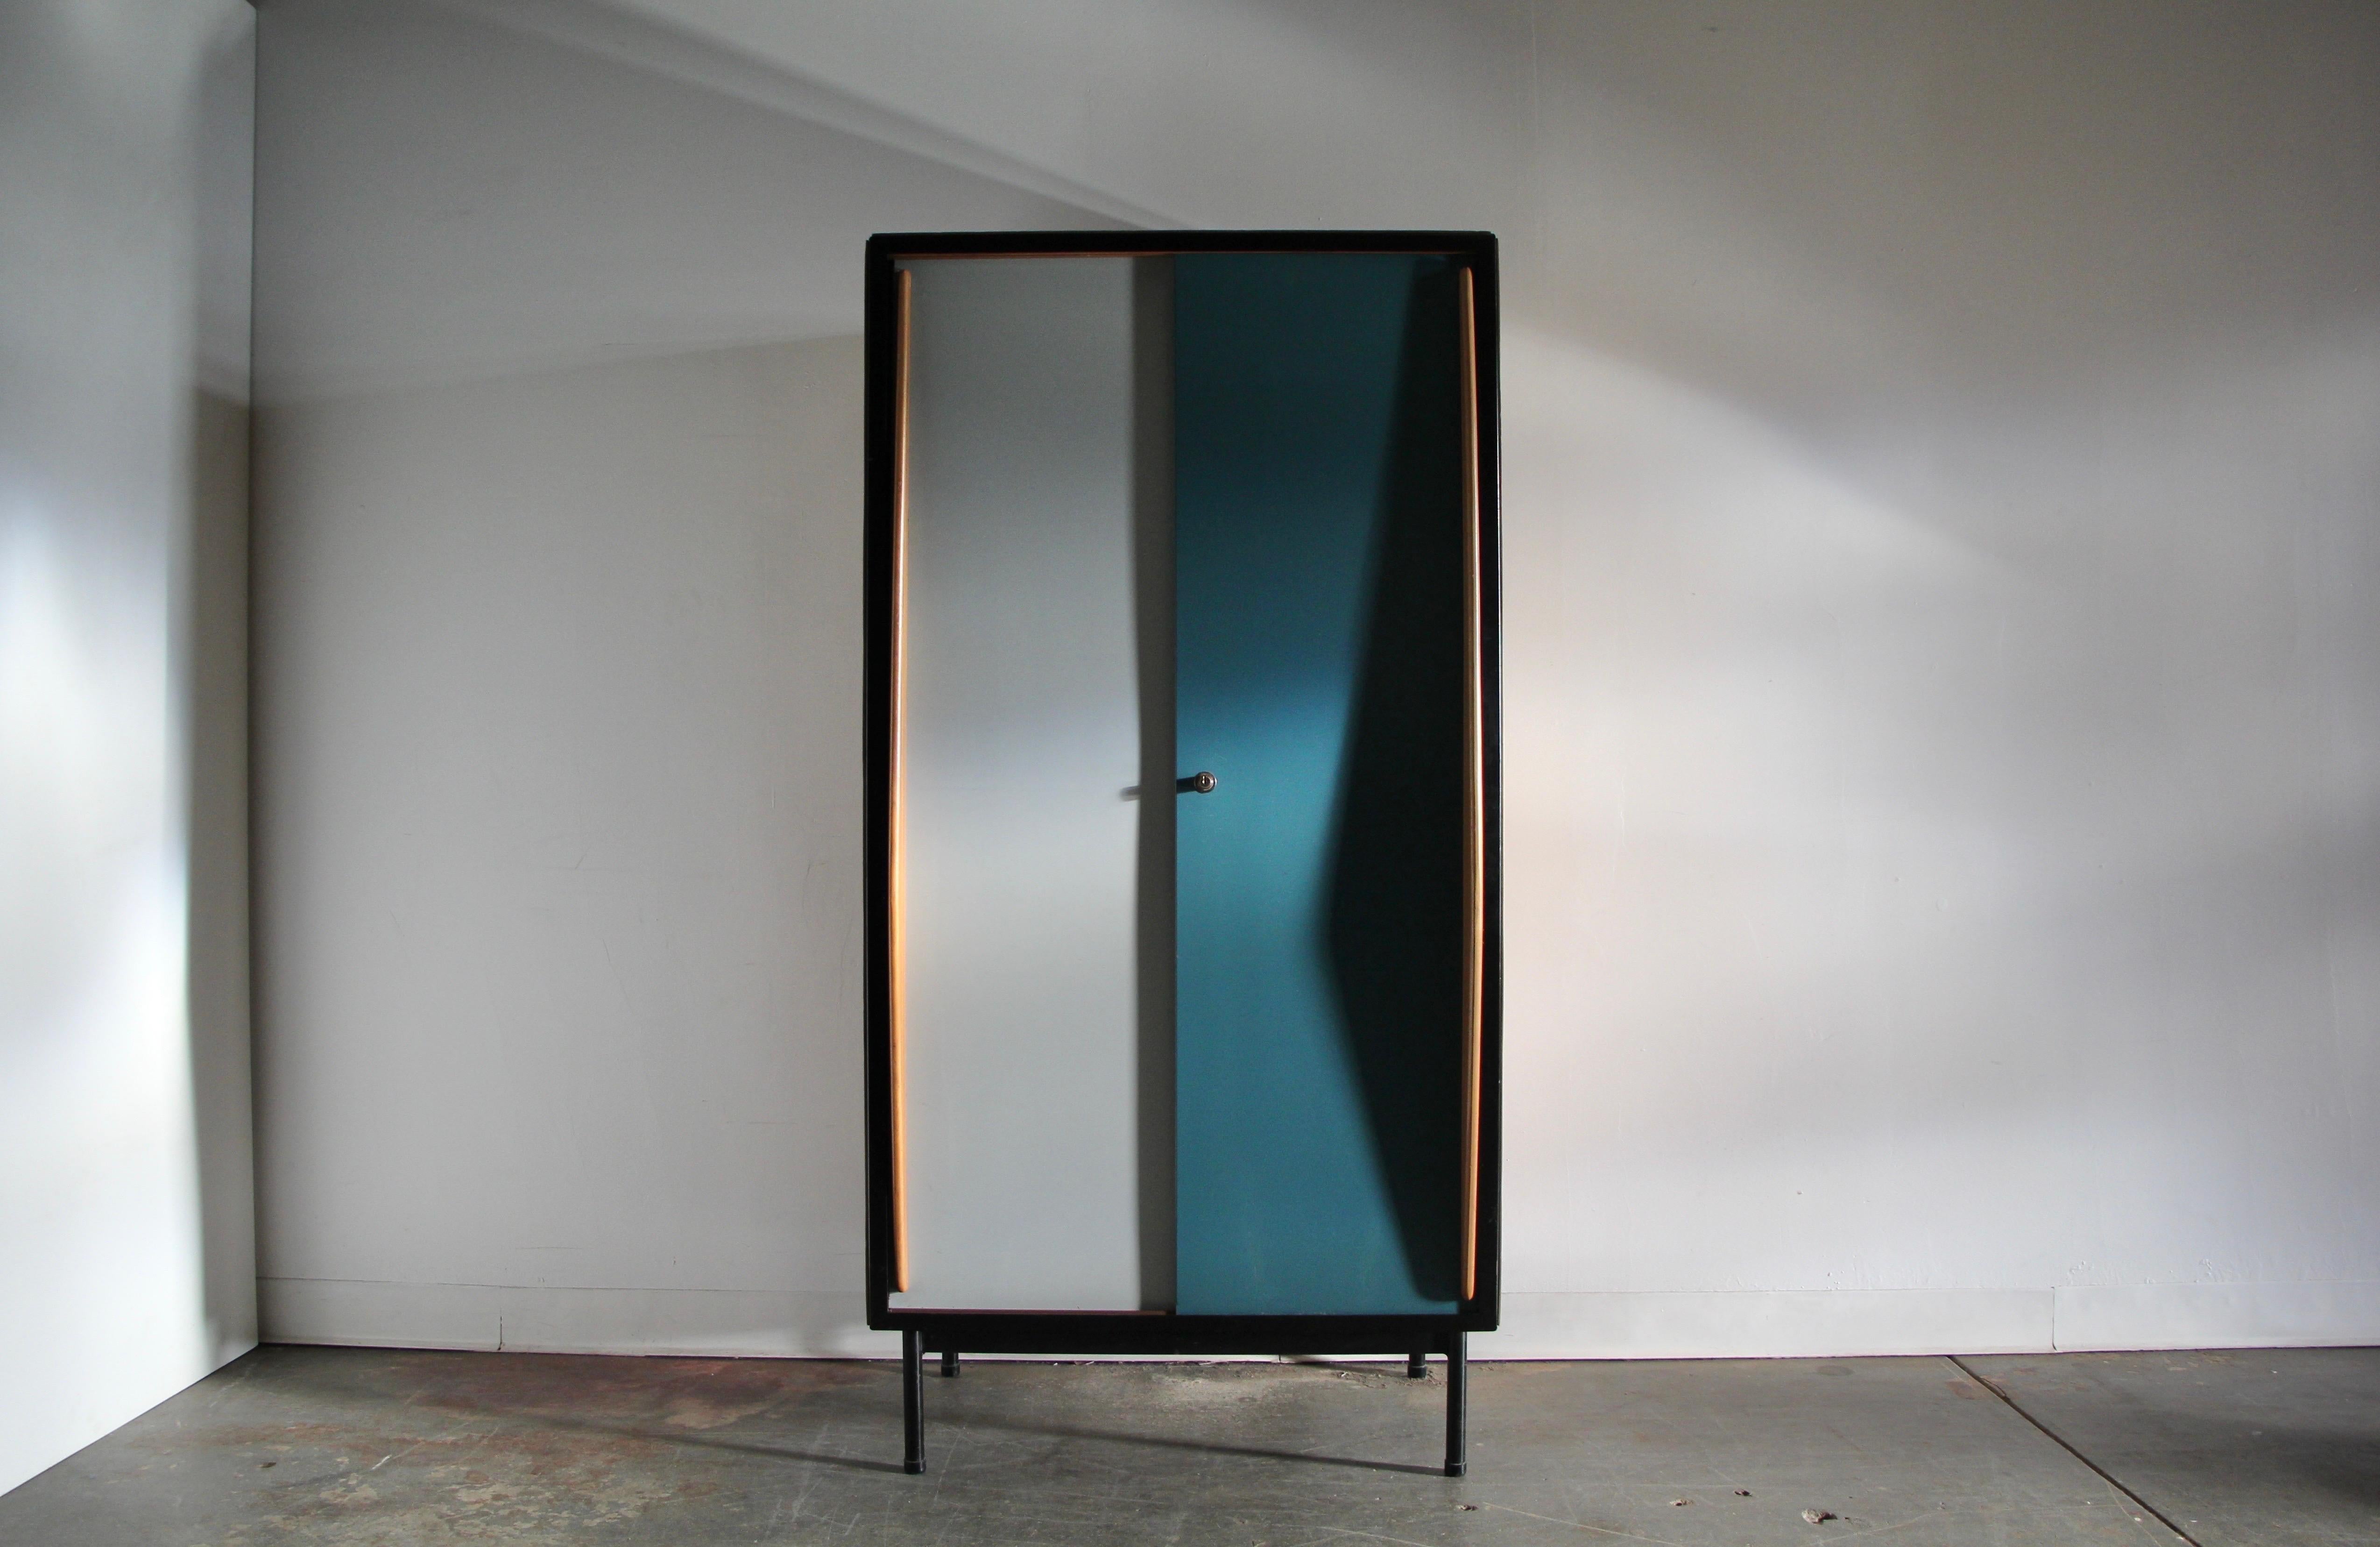 This striking cabinet was conceived by the Belgian designer Willy Van Der Meeren for Tubax, in 1952. This early example is constructed of lacquered plywood, mahogany, and metal. The front is adorned with two large sliding doors, one a muted blue